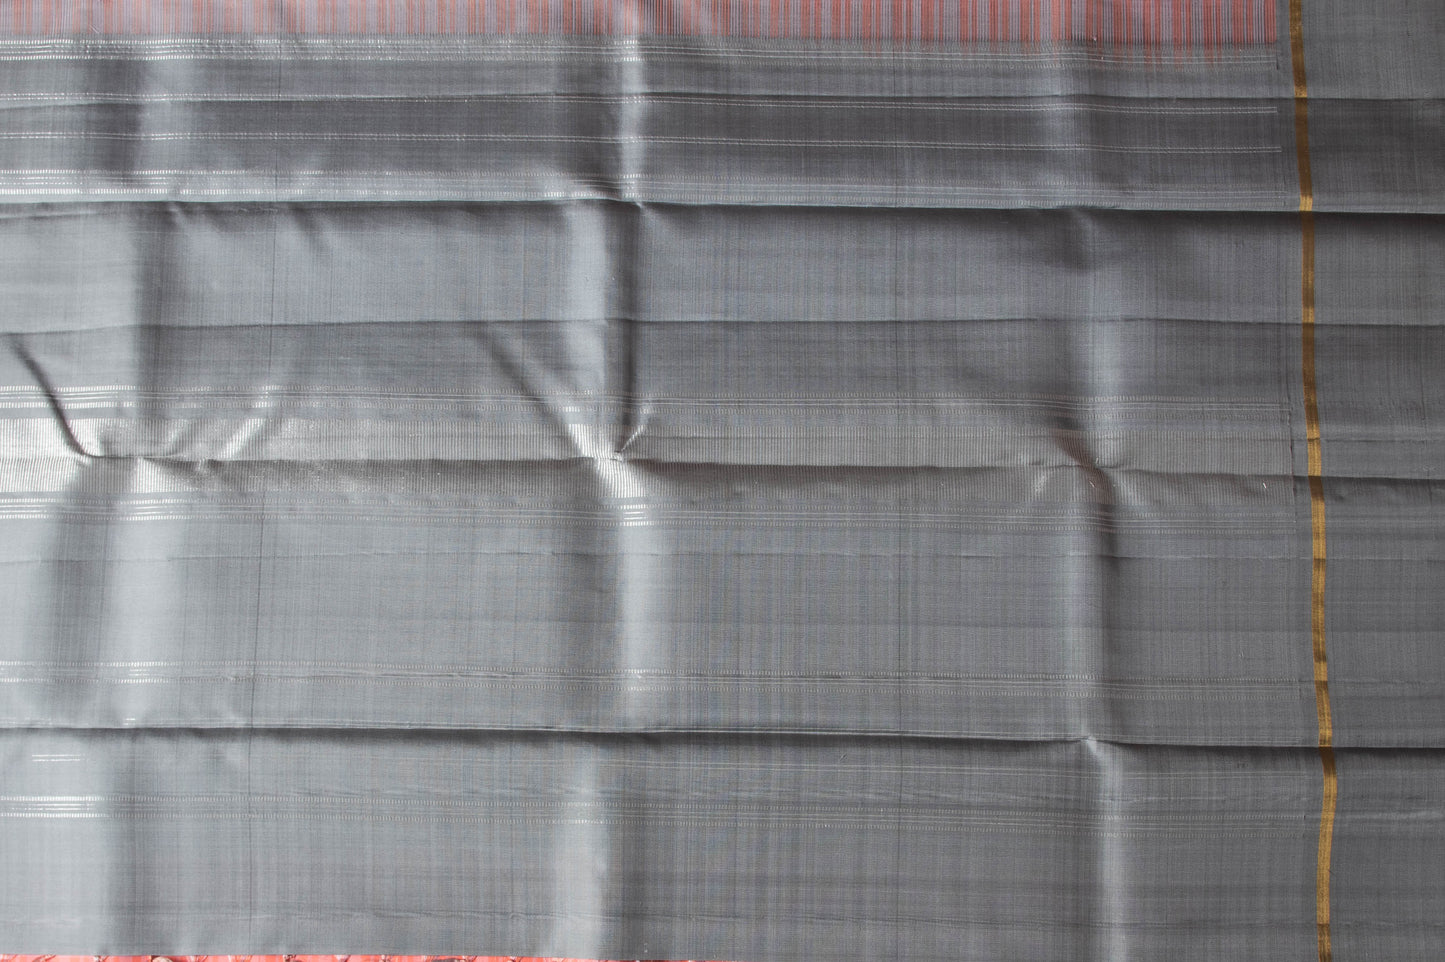 Handwoven Kanchi Korvai Silk Saree in Peach, Grey and Beige